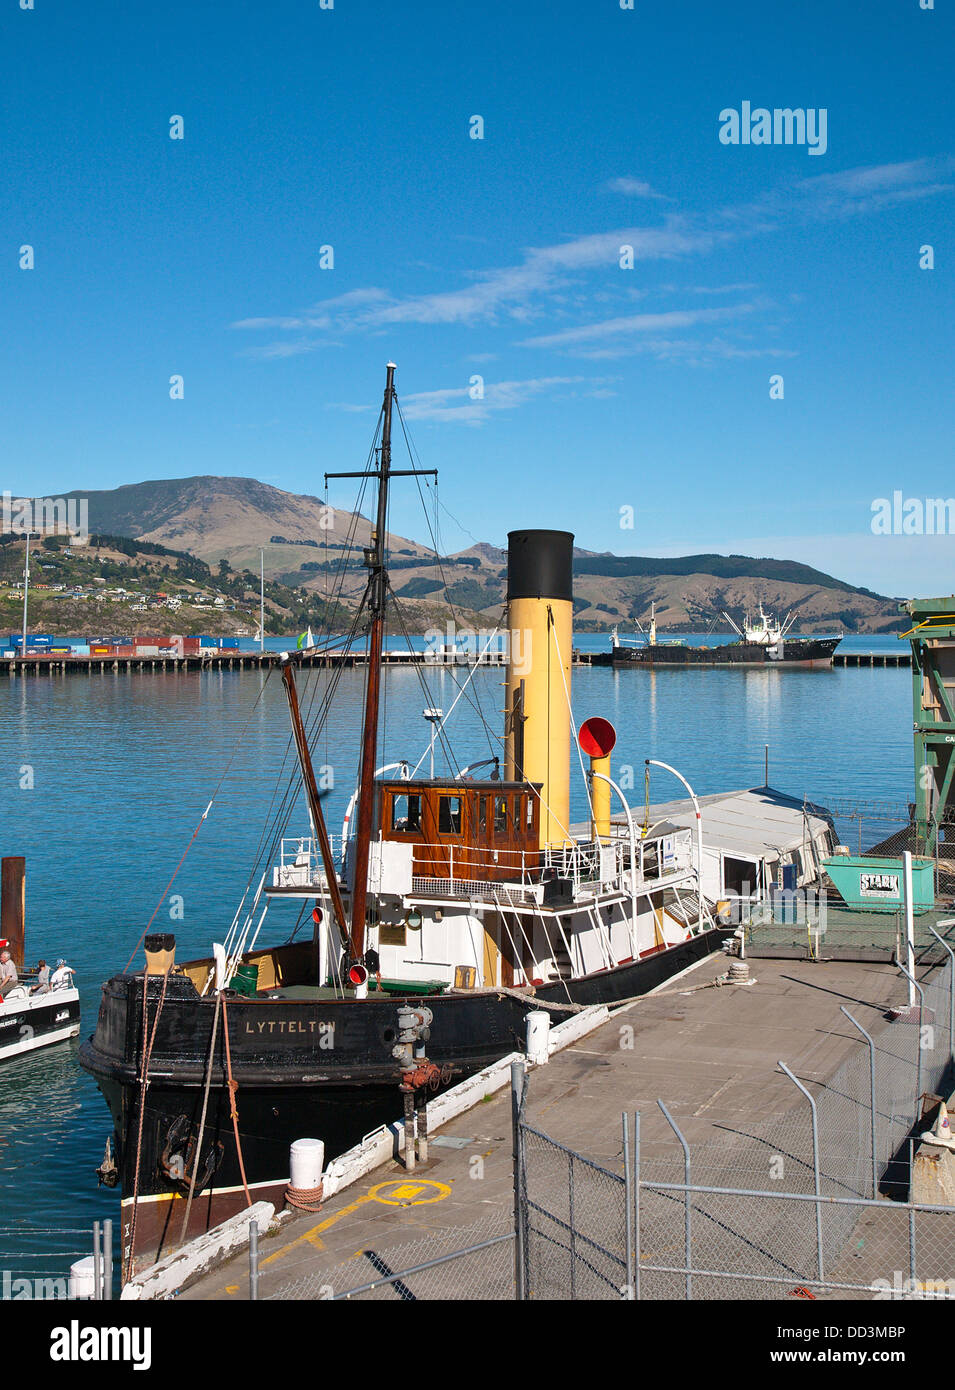 The old traditional vintage steam tug 'Lyttleton' in Lyttleton Harbour, Christchurch, Canterbury, South Island, New Zealand Stock Photo